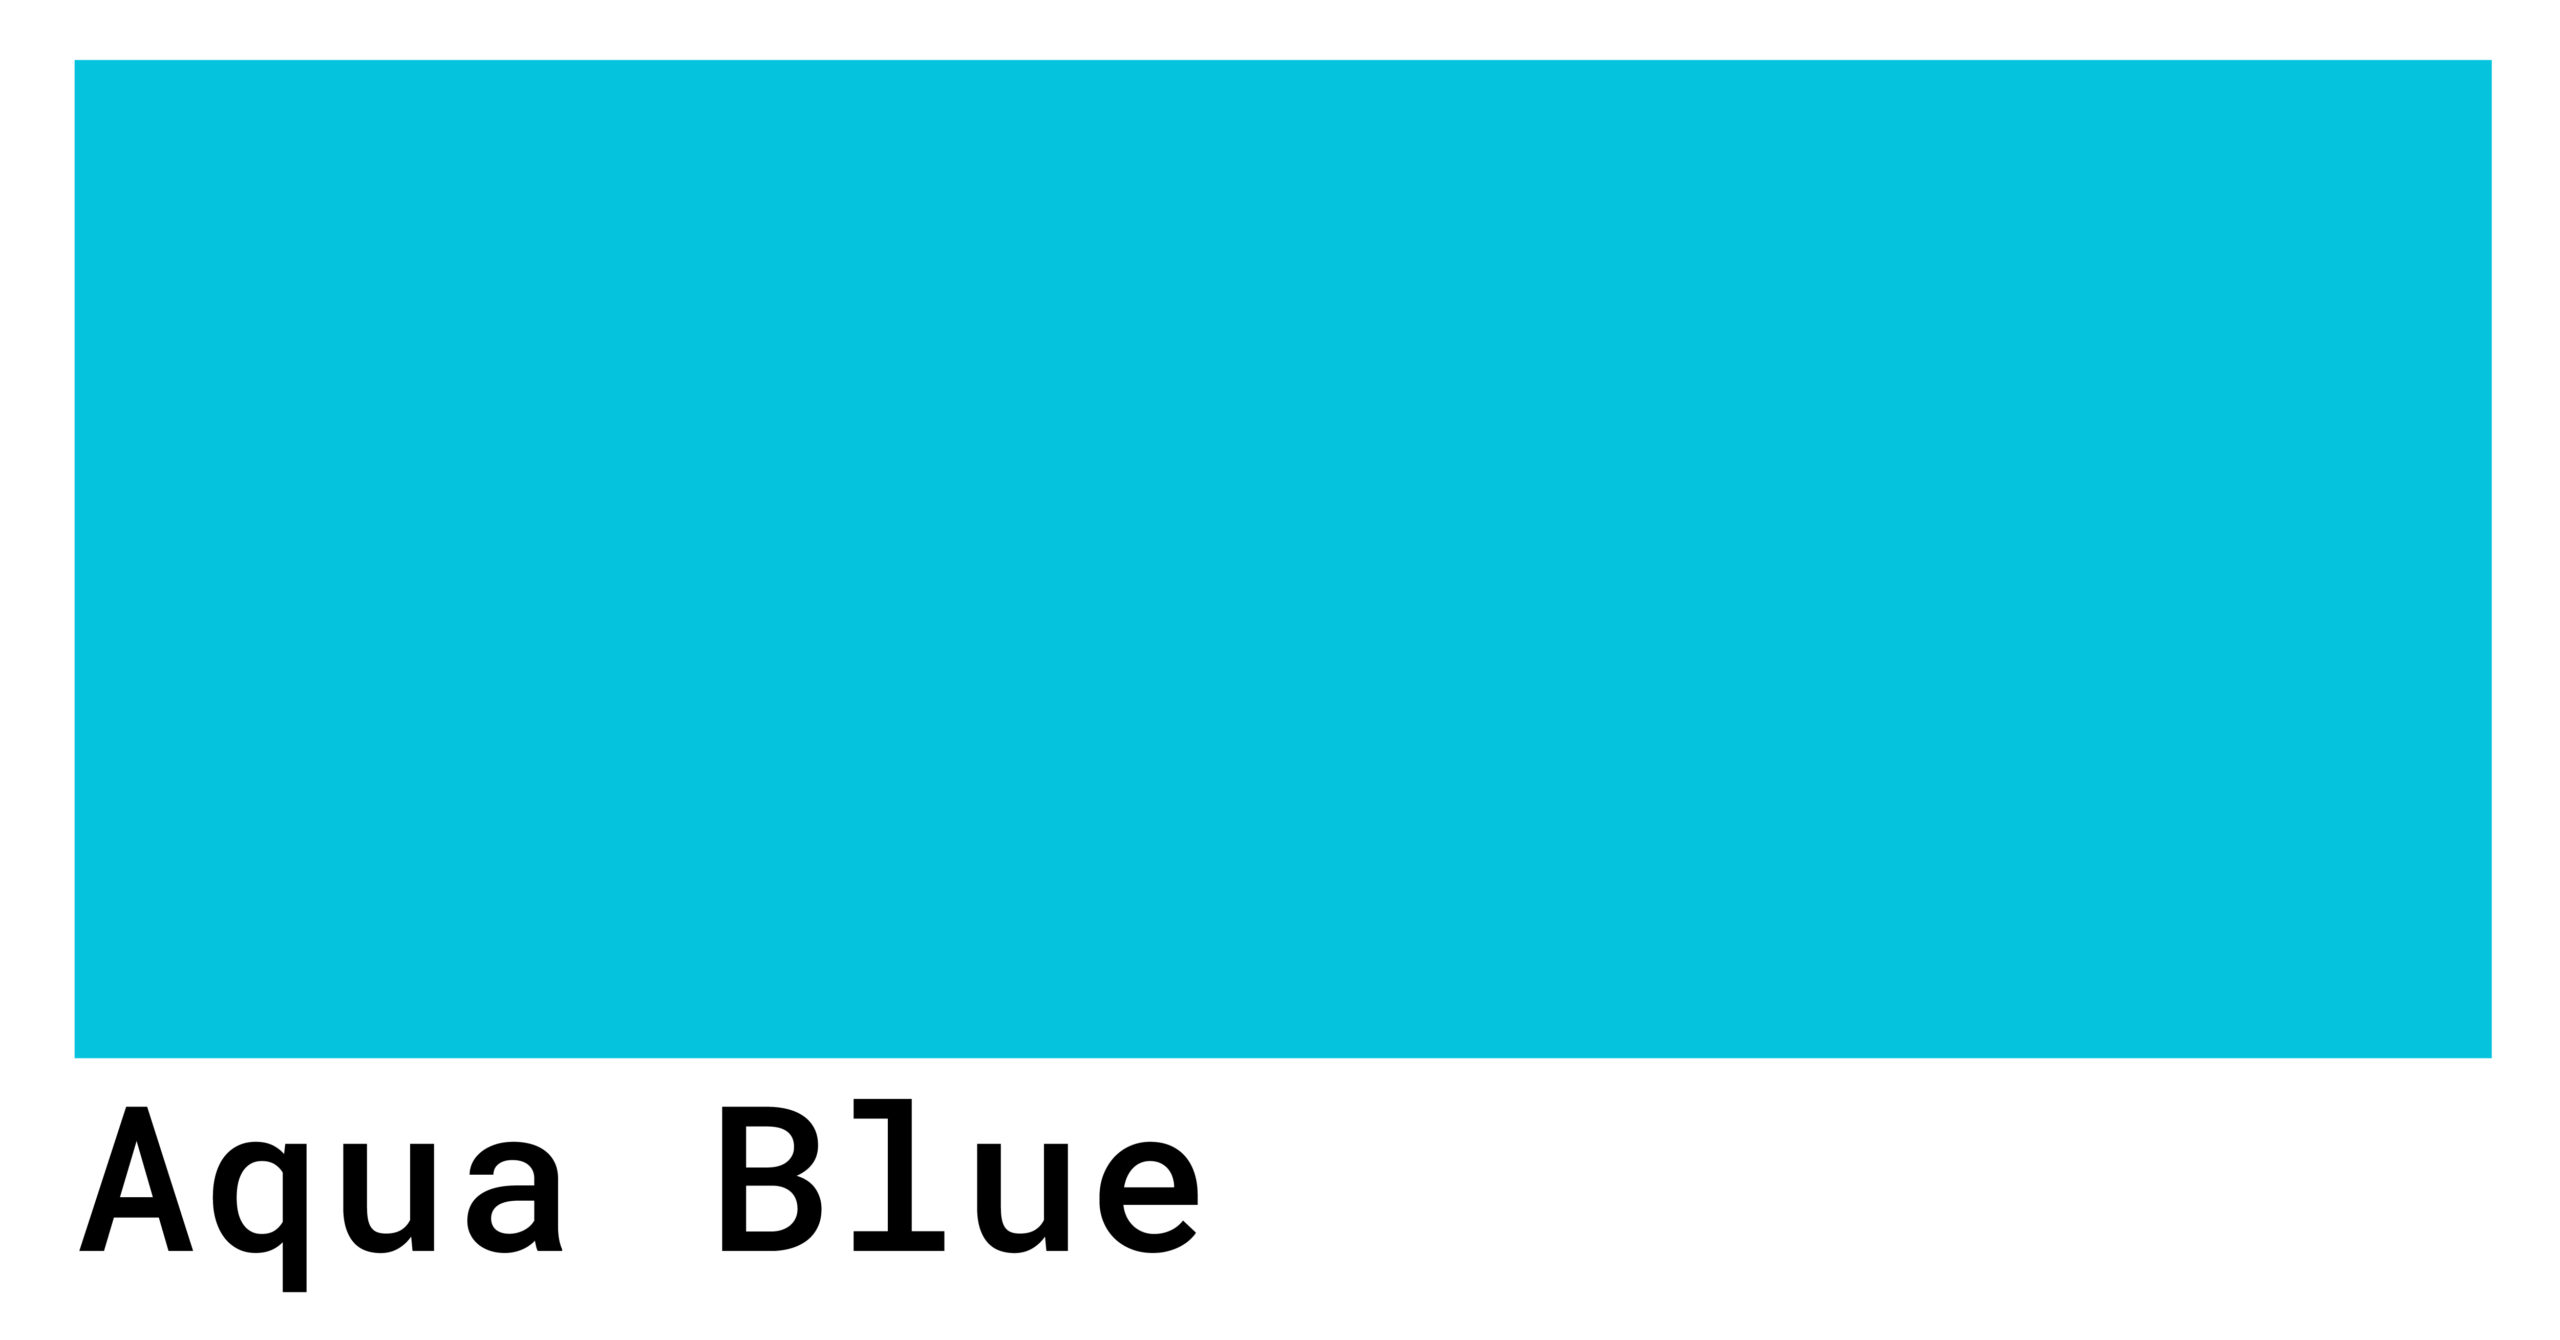 Aqua Blue Color Codes - The Hex, Rgb And Cmyk Values That You Need